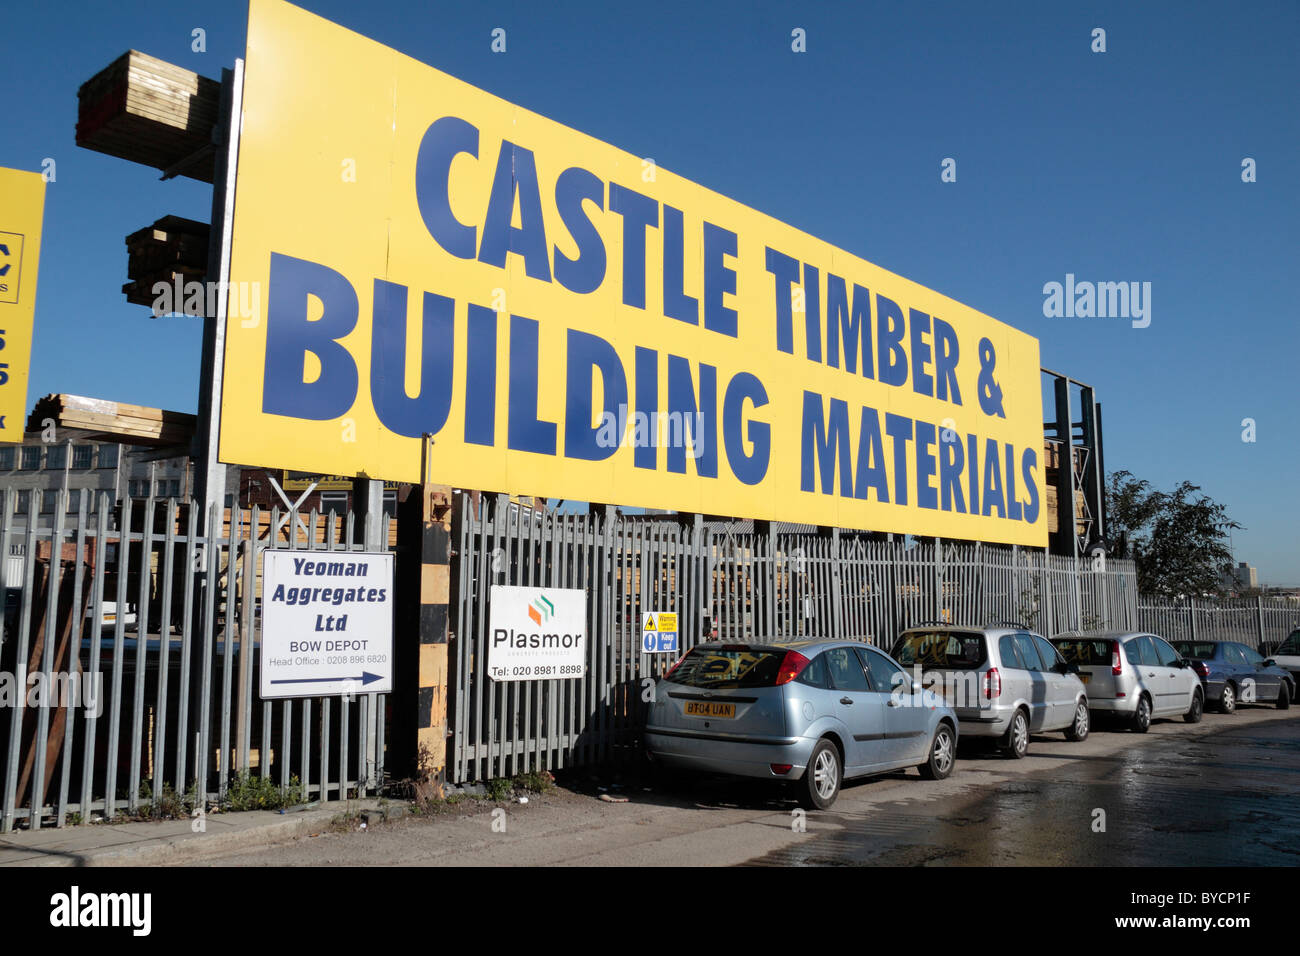 A large sign advertising the Castle Timber and Building Materials, Horn Lane, London, UK. Stock Photo